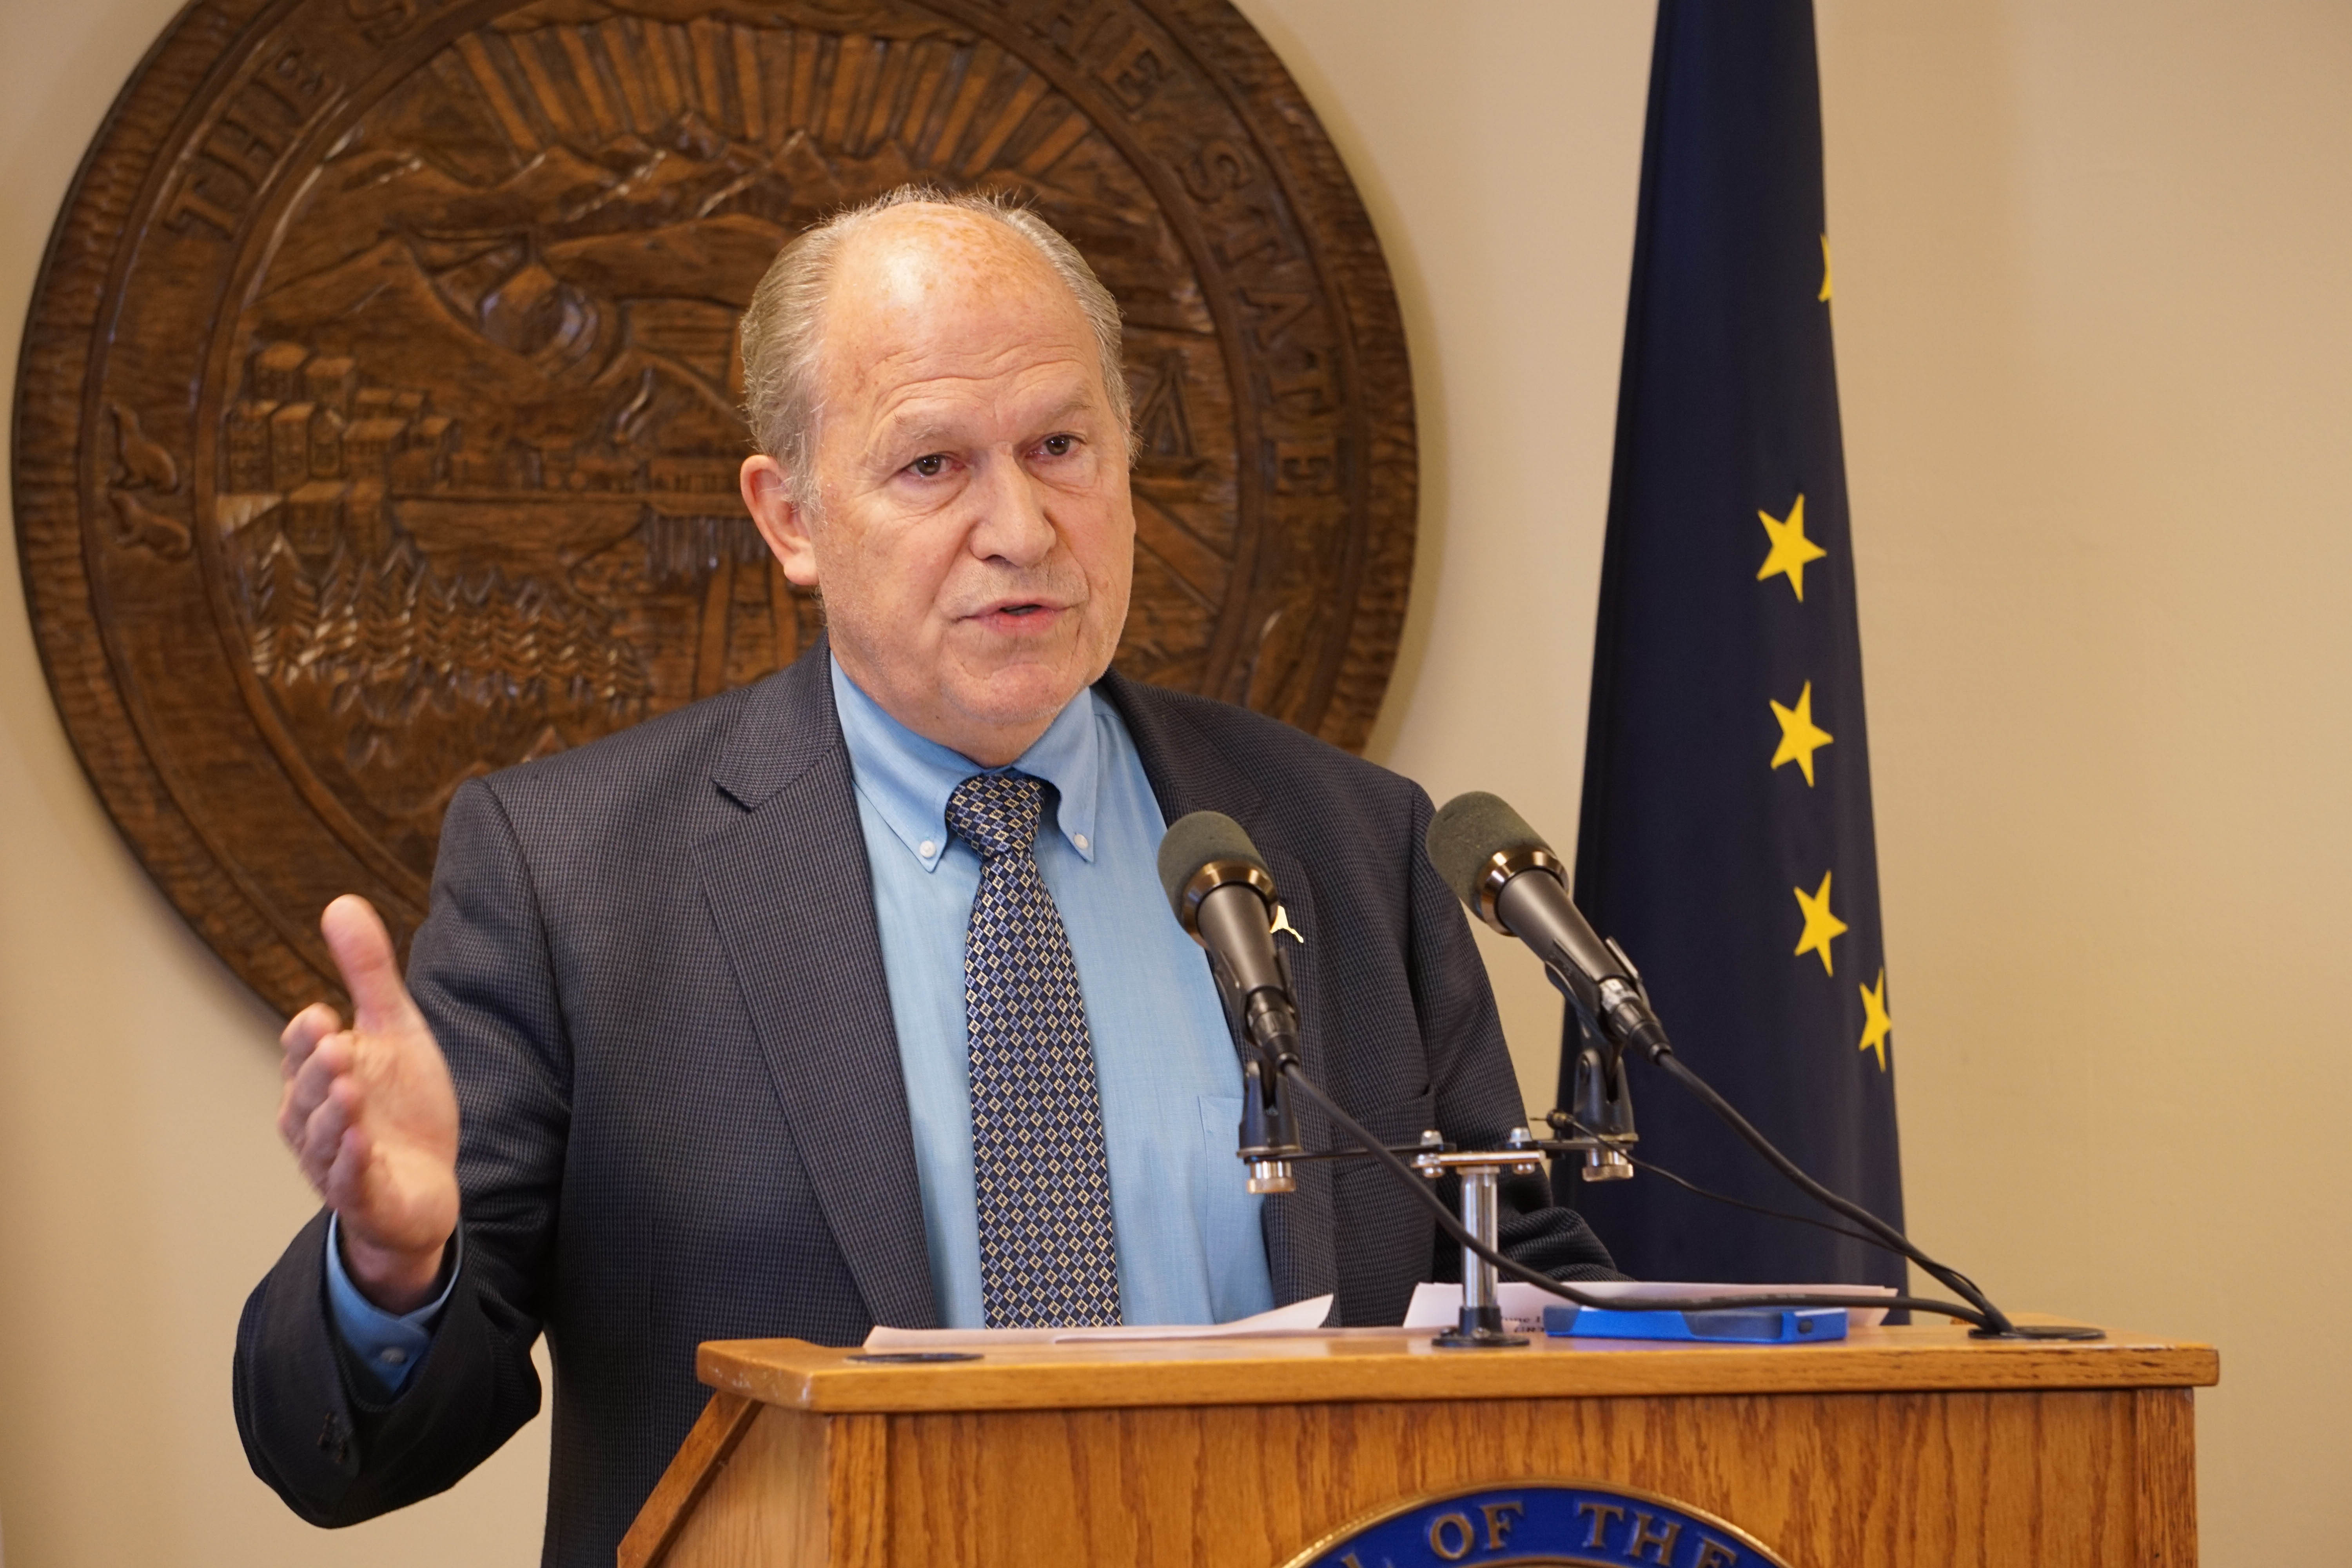 Gov. Bill Walker talks with reporters in his temporary offices in Juneau, June 19,2016. He had just called the legislature back for a fifth special session. (Photo by Jeremy Hsieh, KTOO - Juneau)